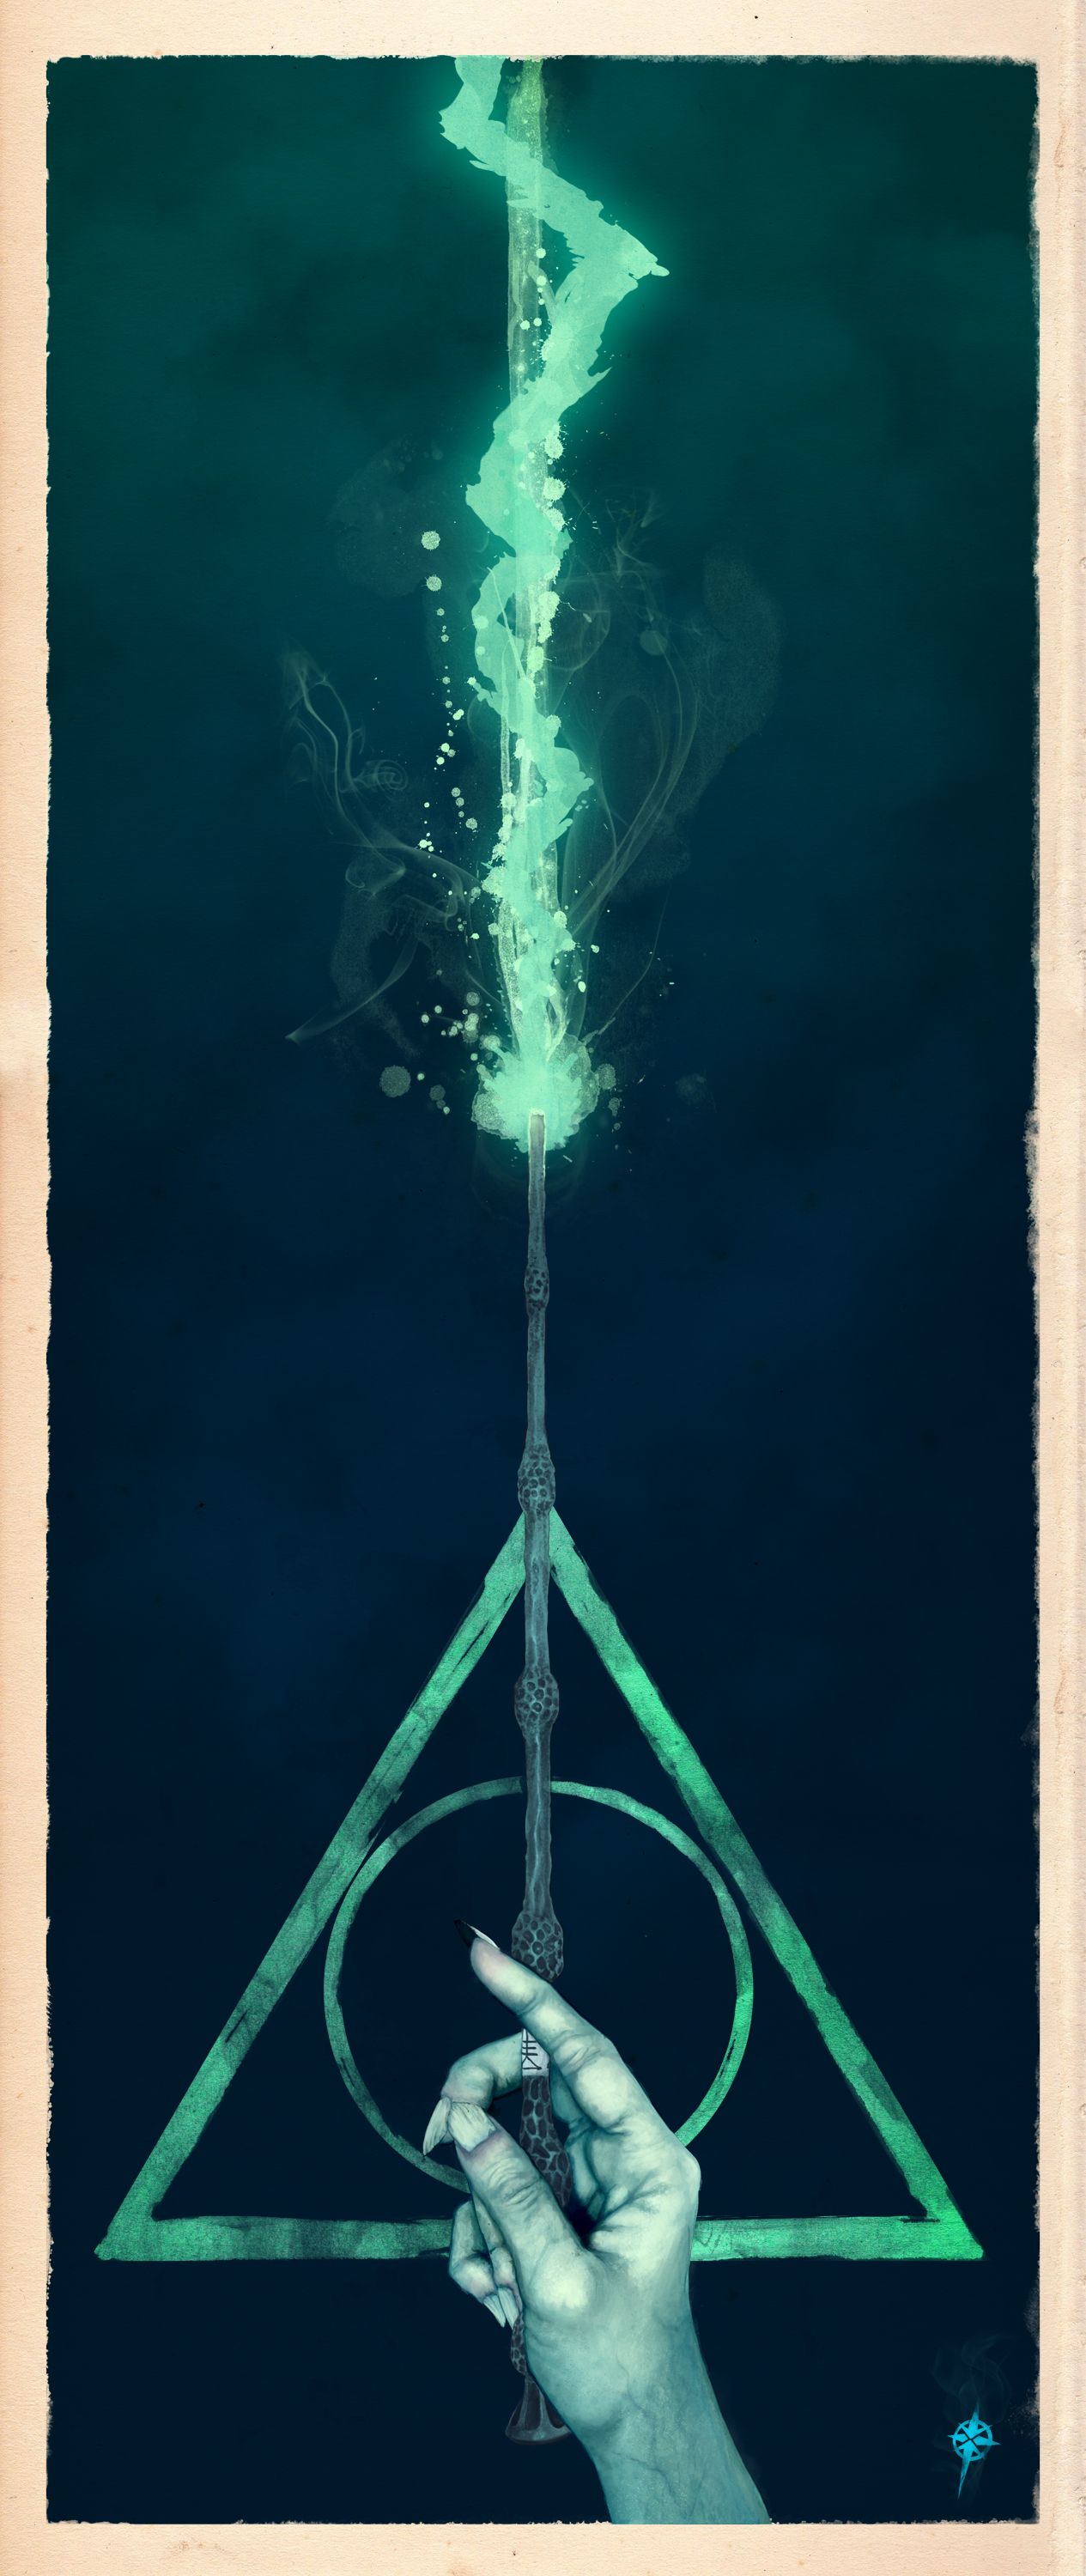 Harry potter deathly hallows: awesome wallpaper. Harry potter